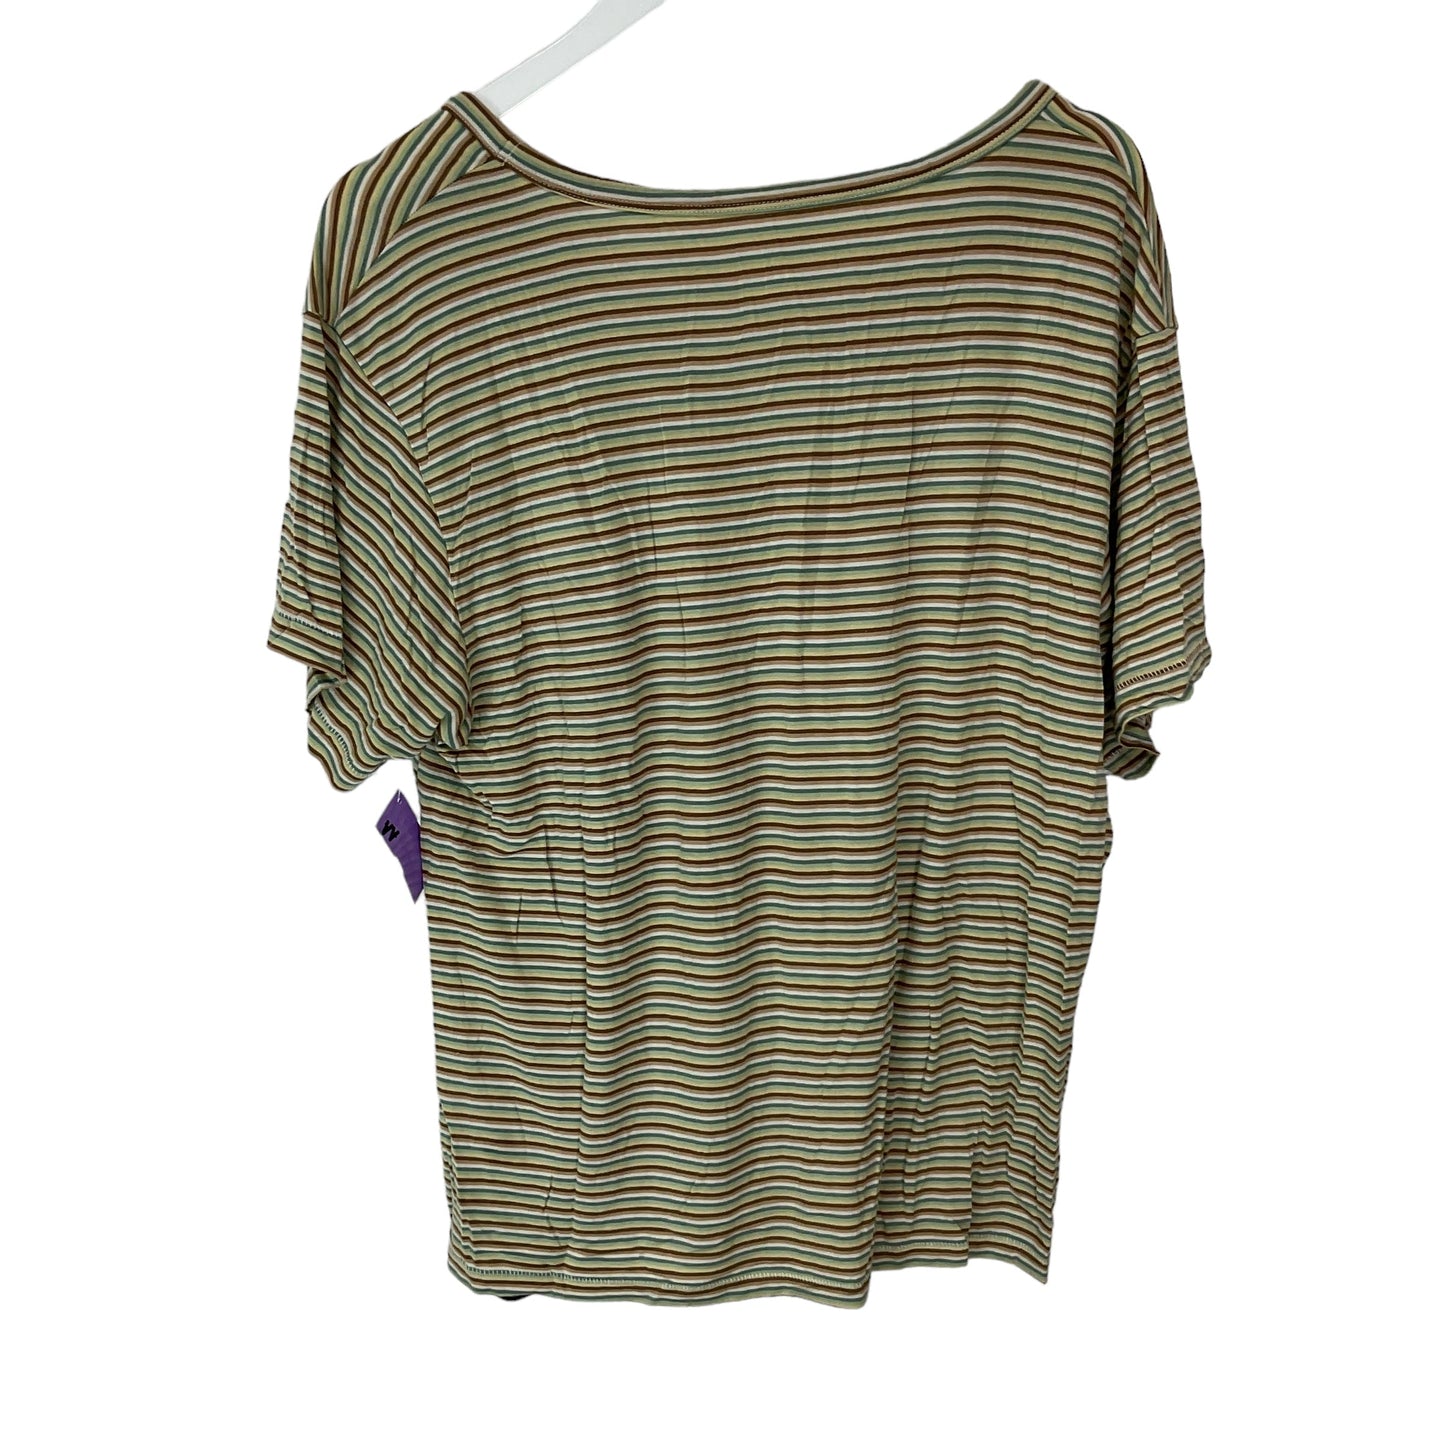 Green Top Short Sleeve American Eagle, Size M